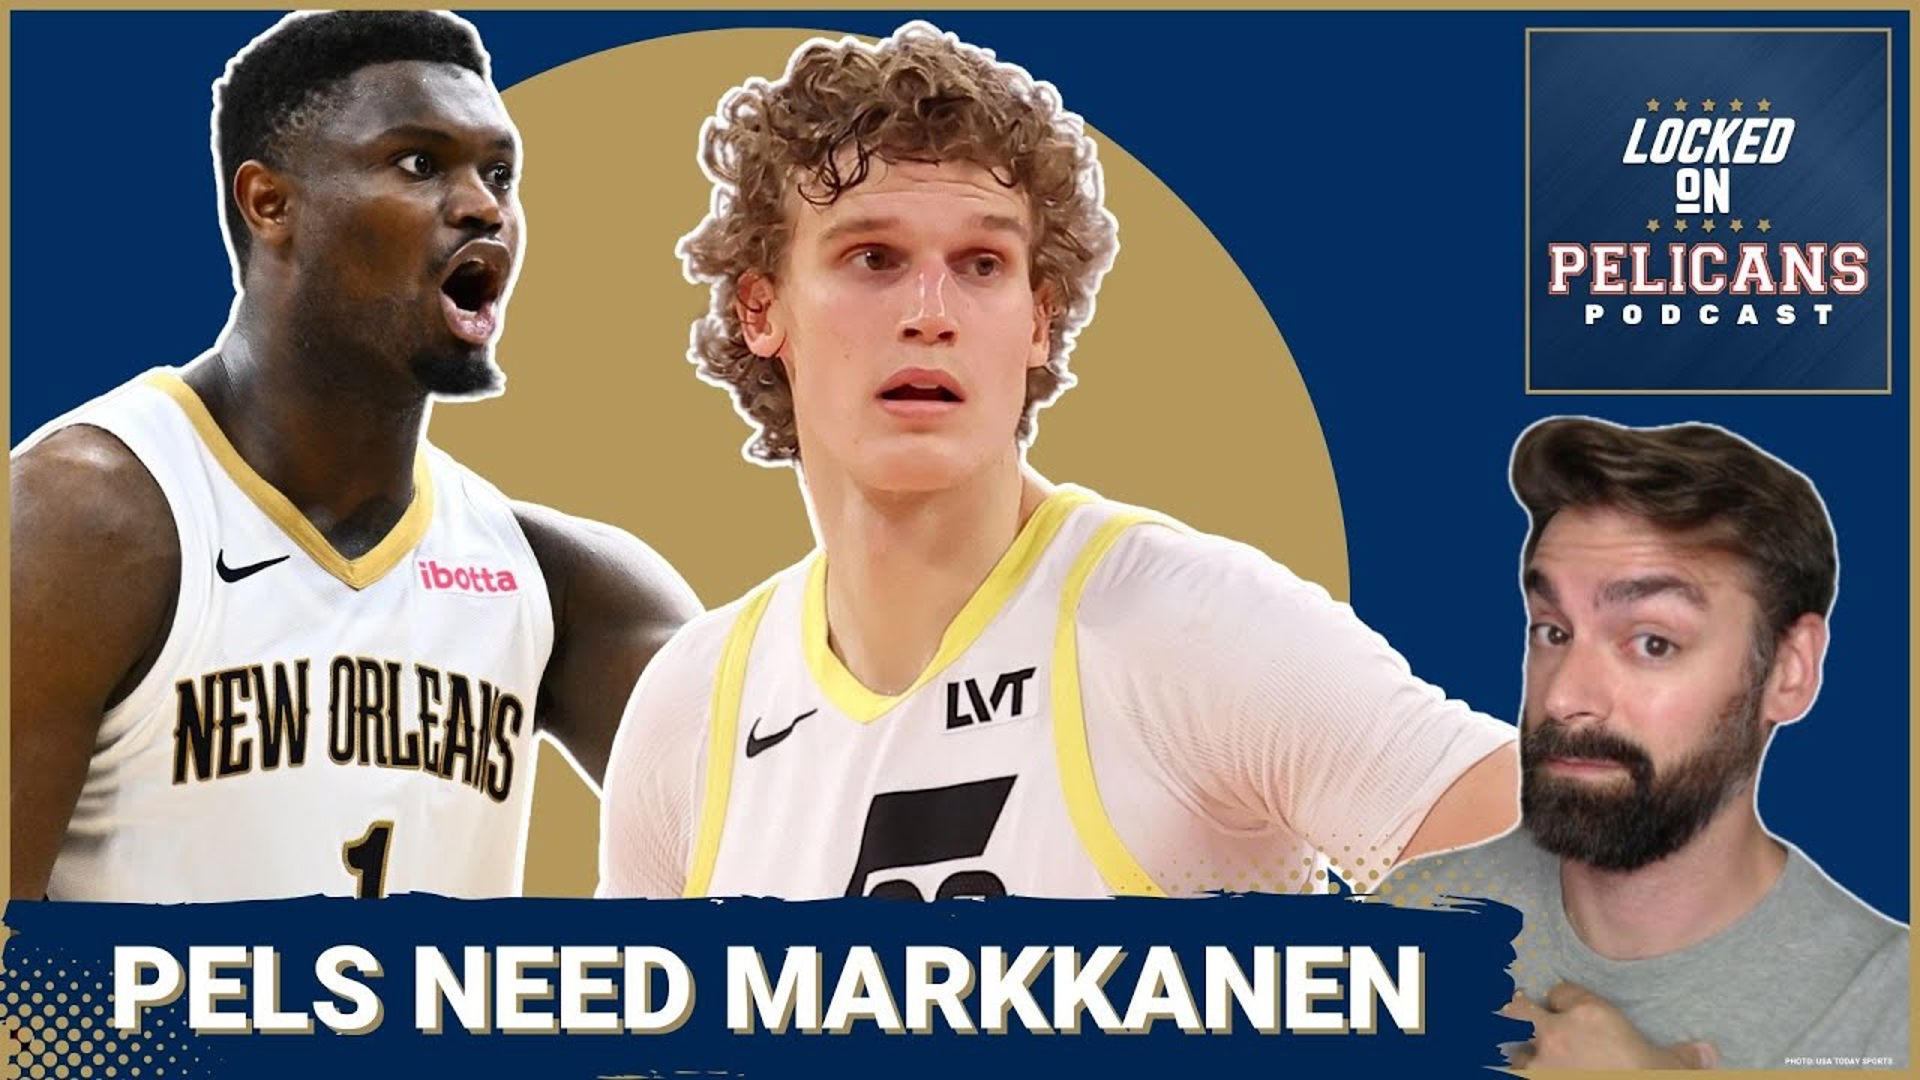 It's time for the New Orleans Pelicans to go all in around Zion Williamson by trading for Lauri Markkanen.